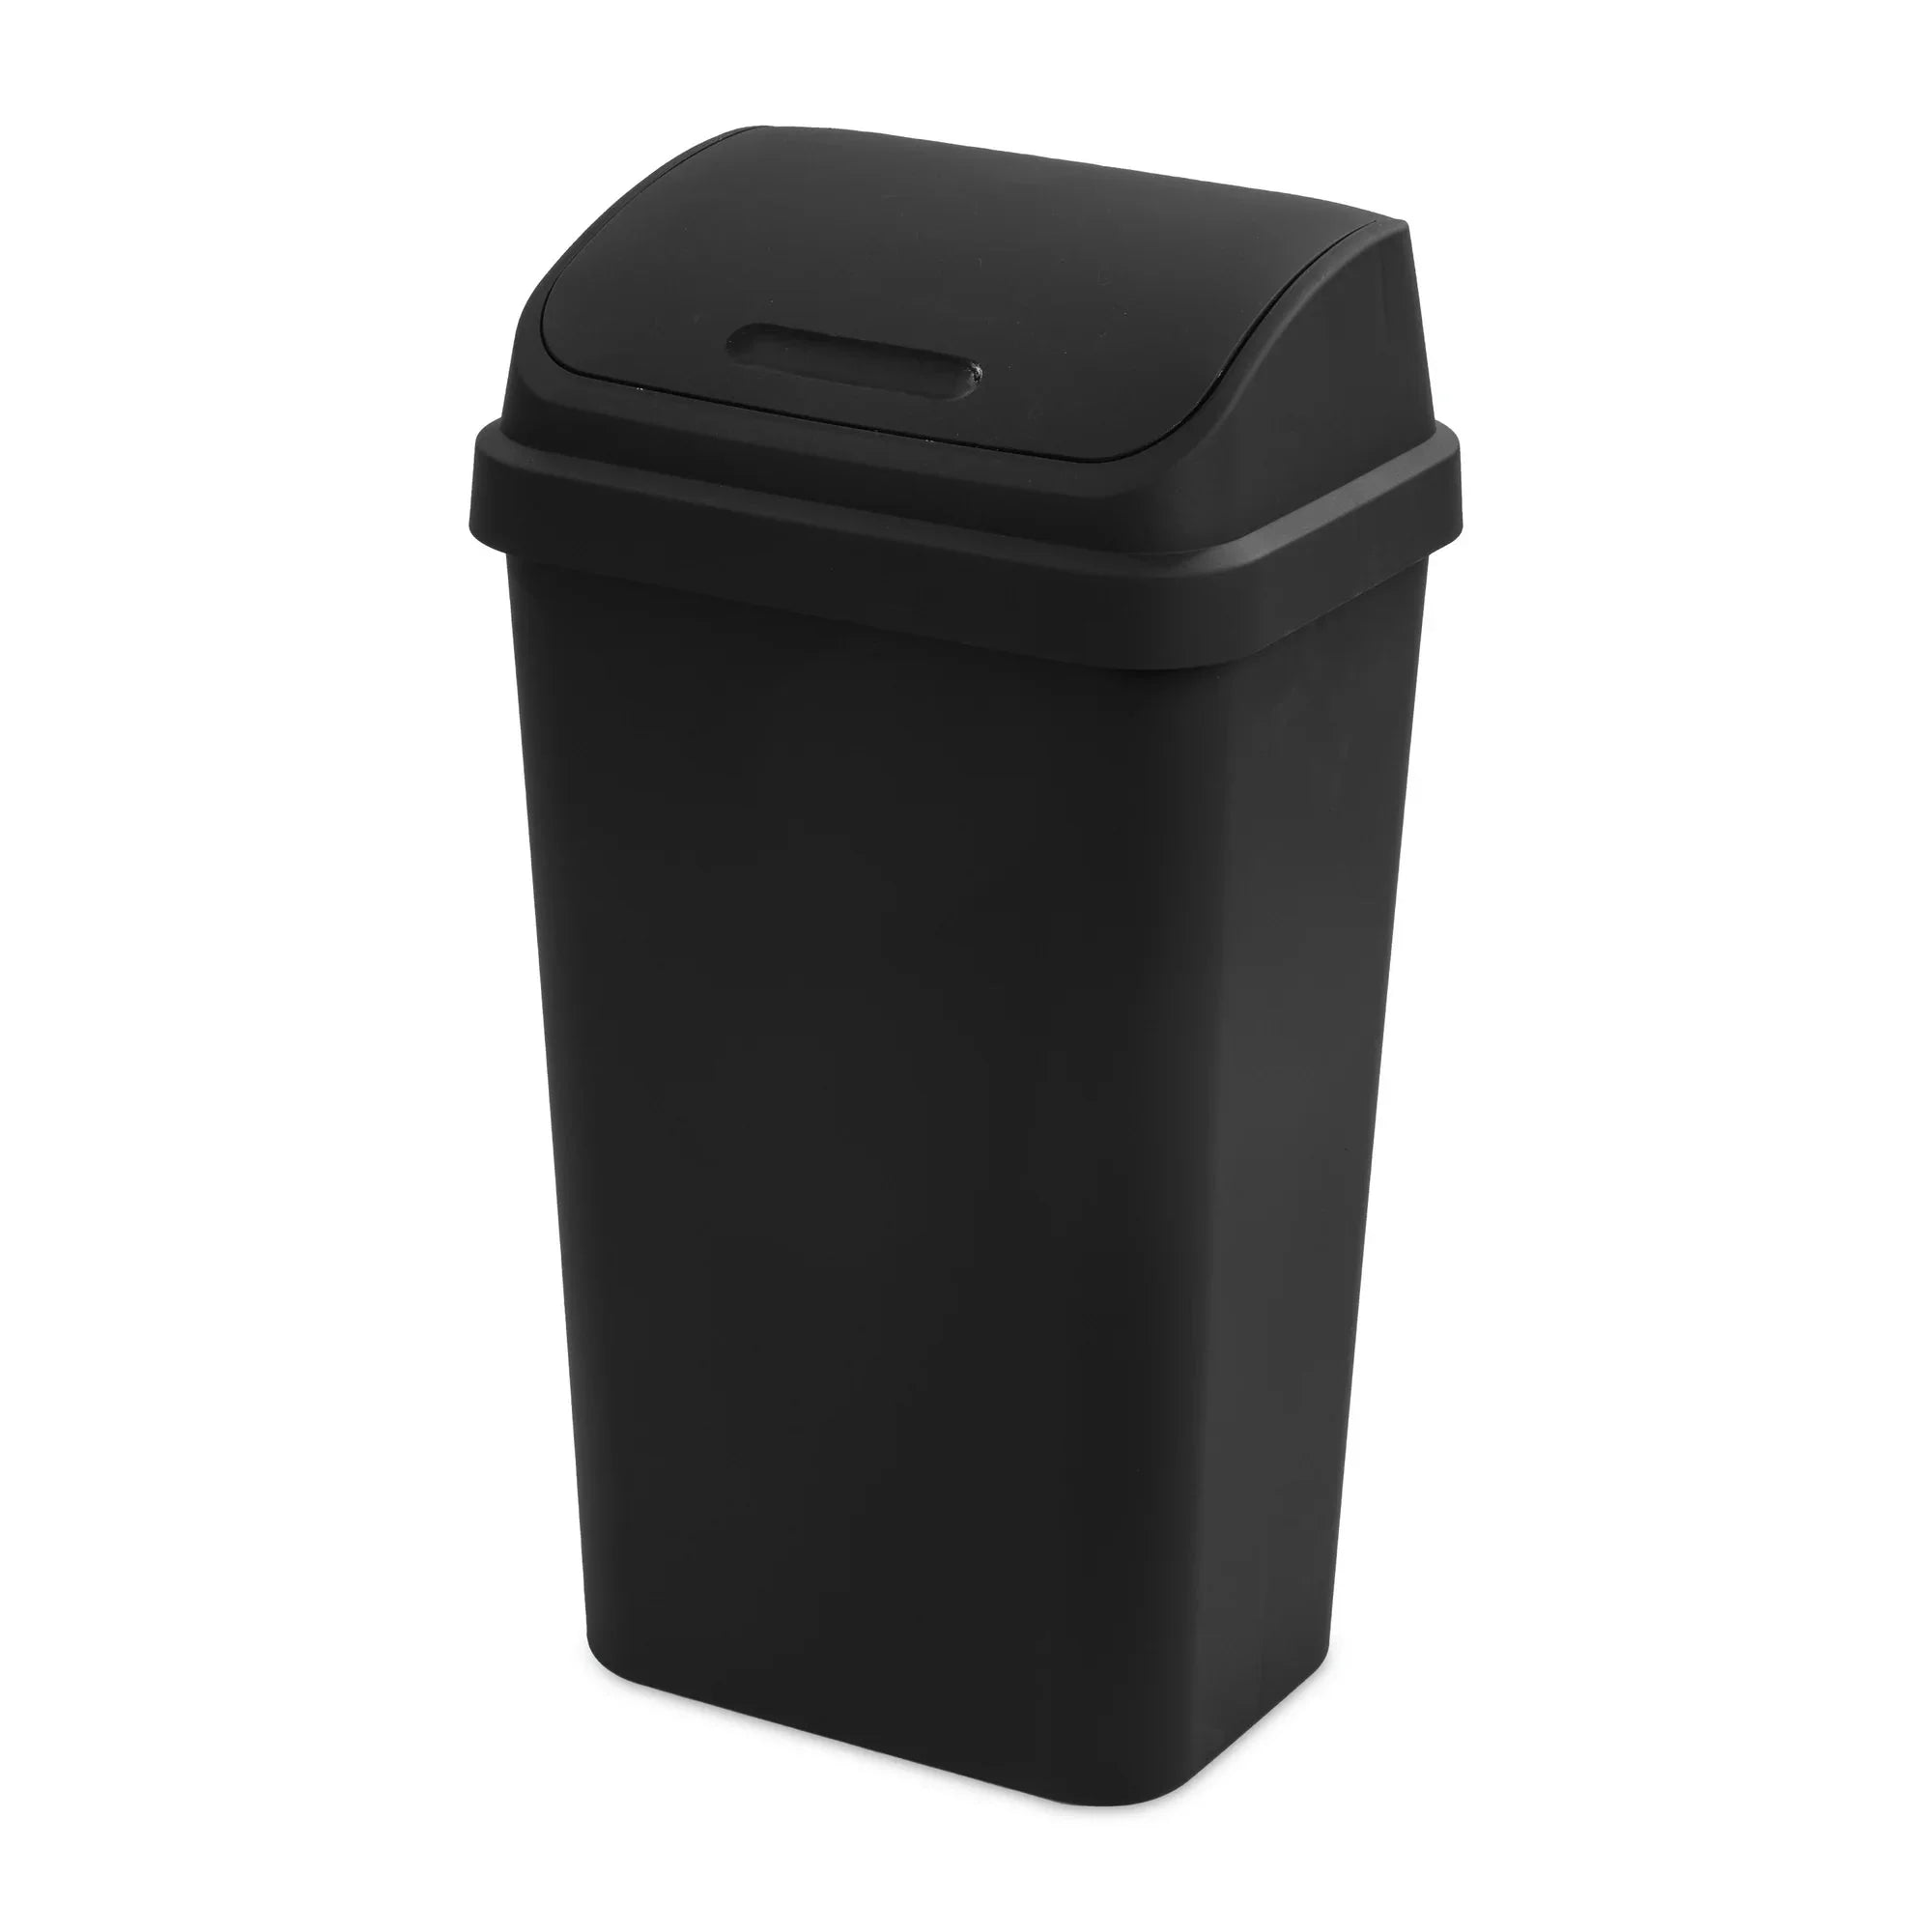 Wholesale prices with free shipping all over United States Sterilite 13 Gallon Trash Can, Plastic Swing Top Kitchen Trash Can, Black - Steven Deals